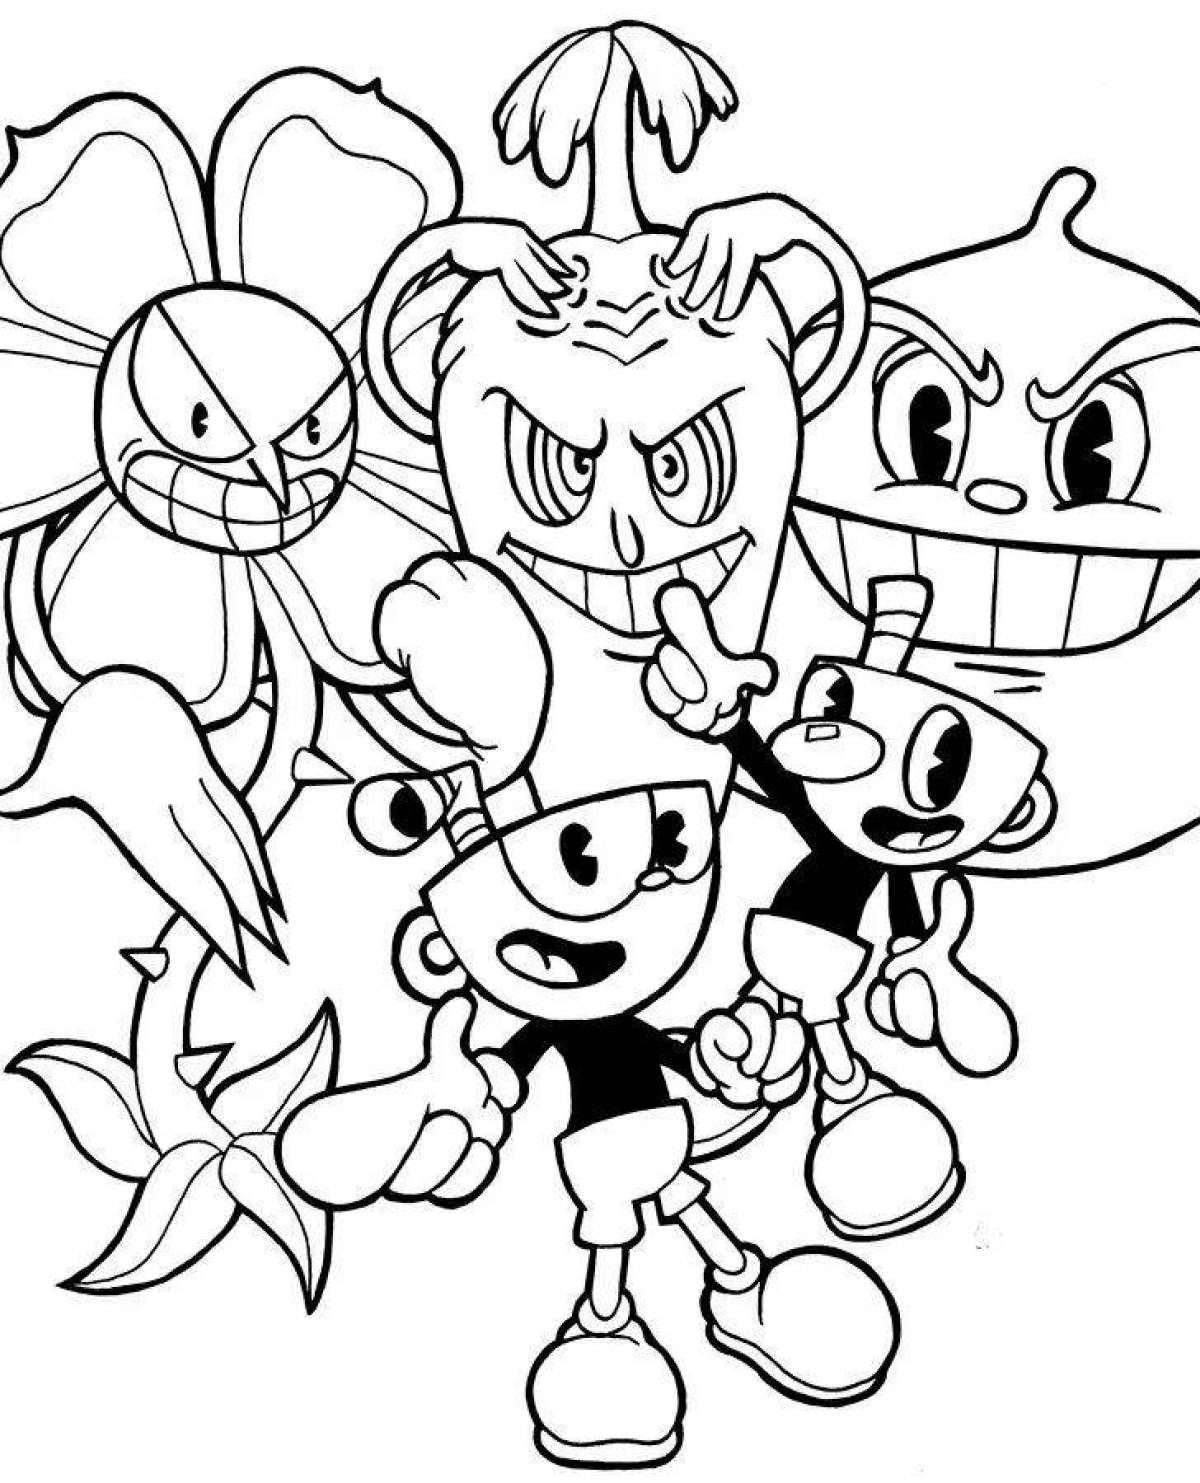 Colorful cuphead coloring page